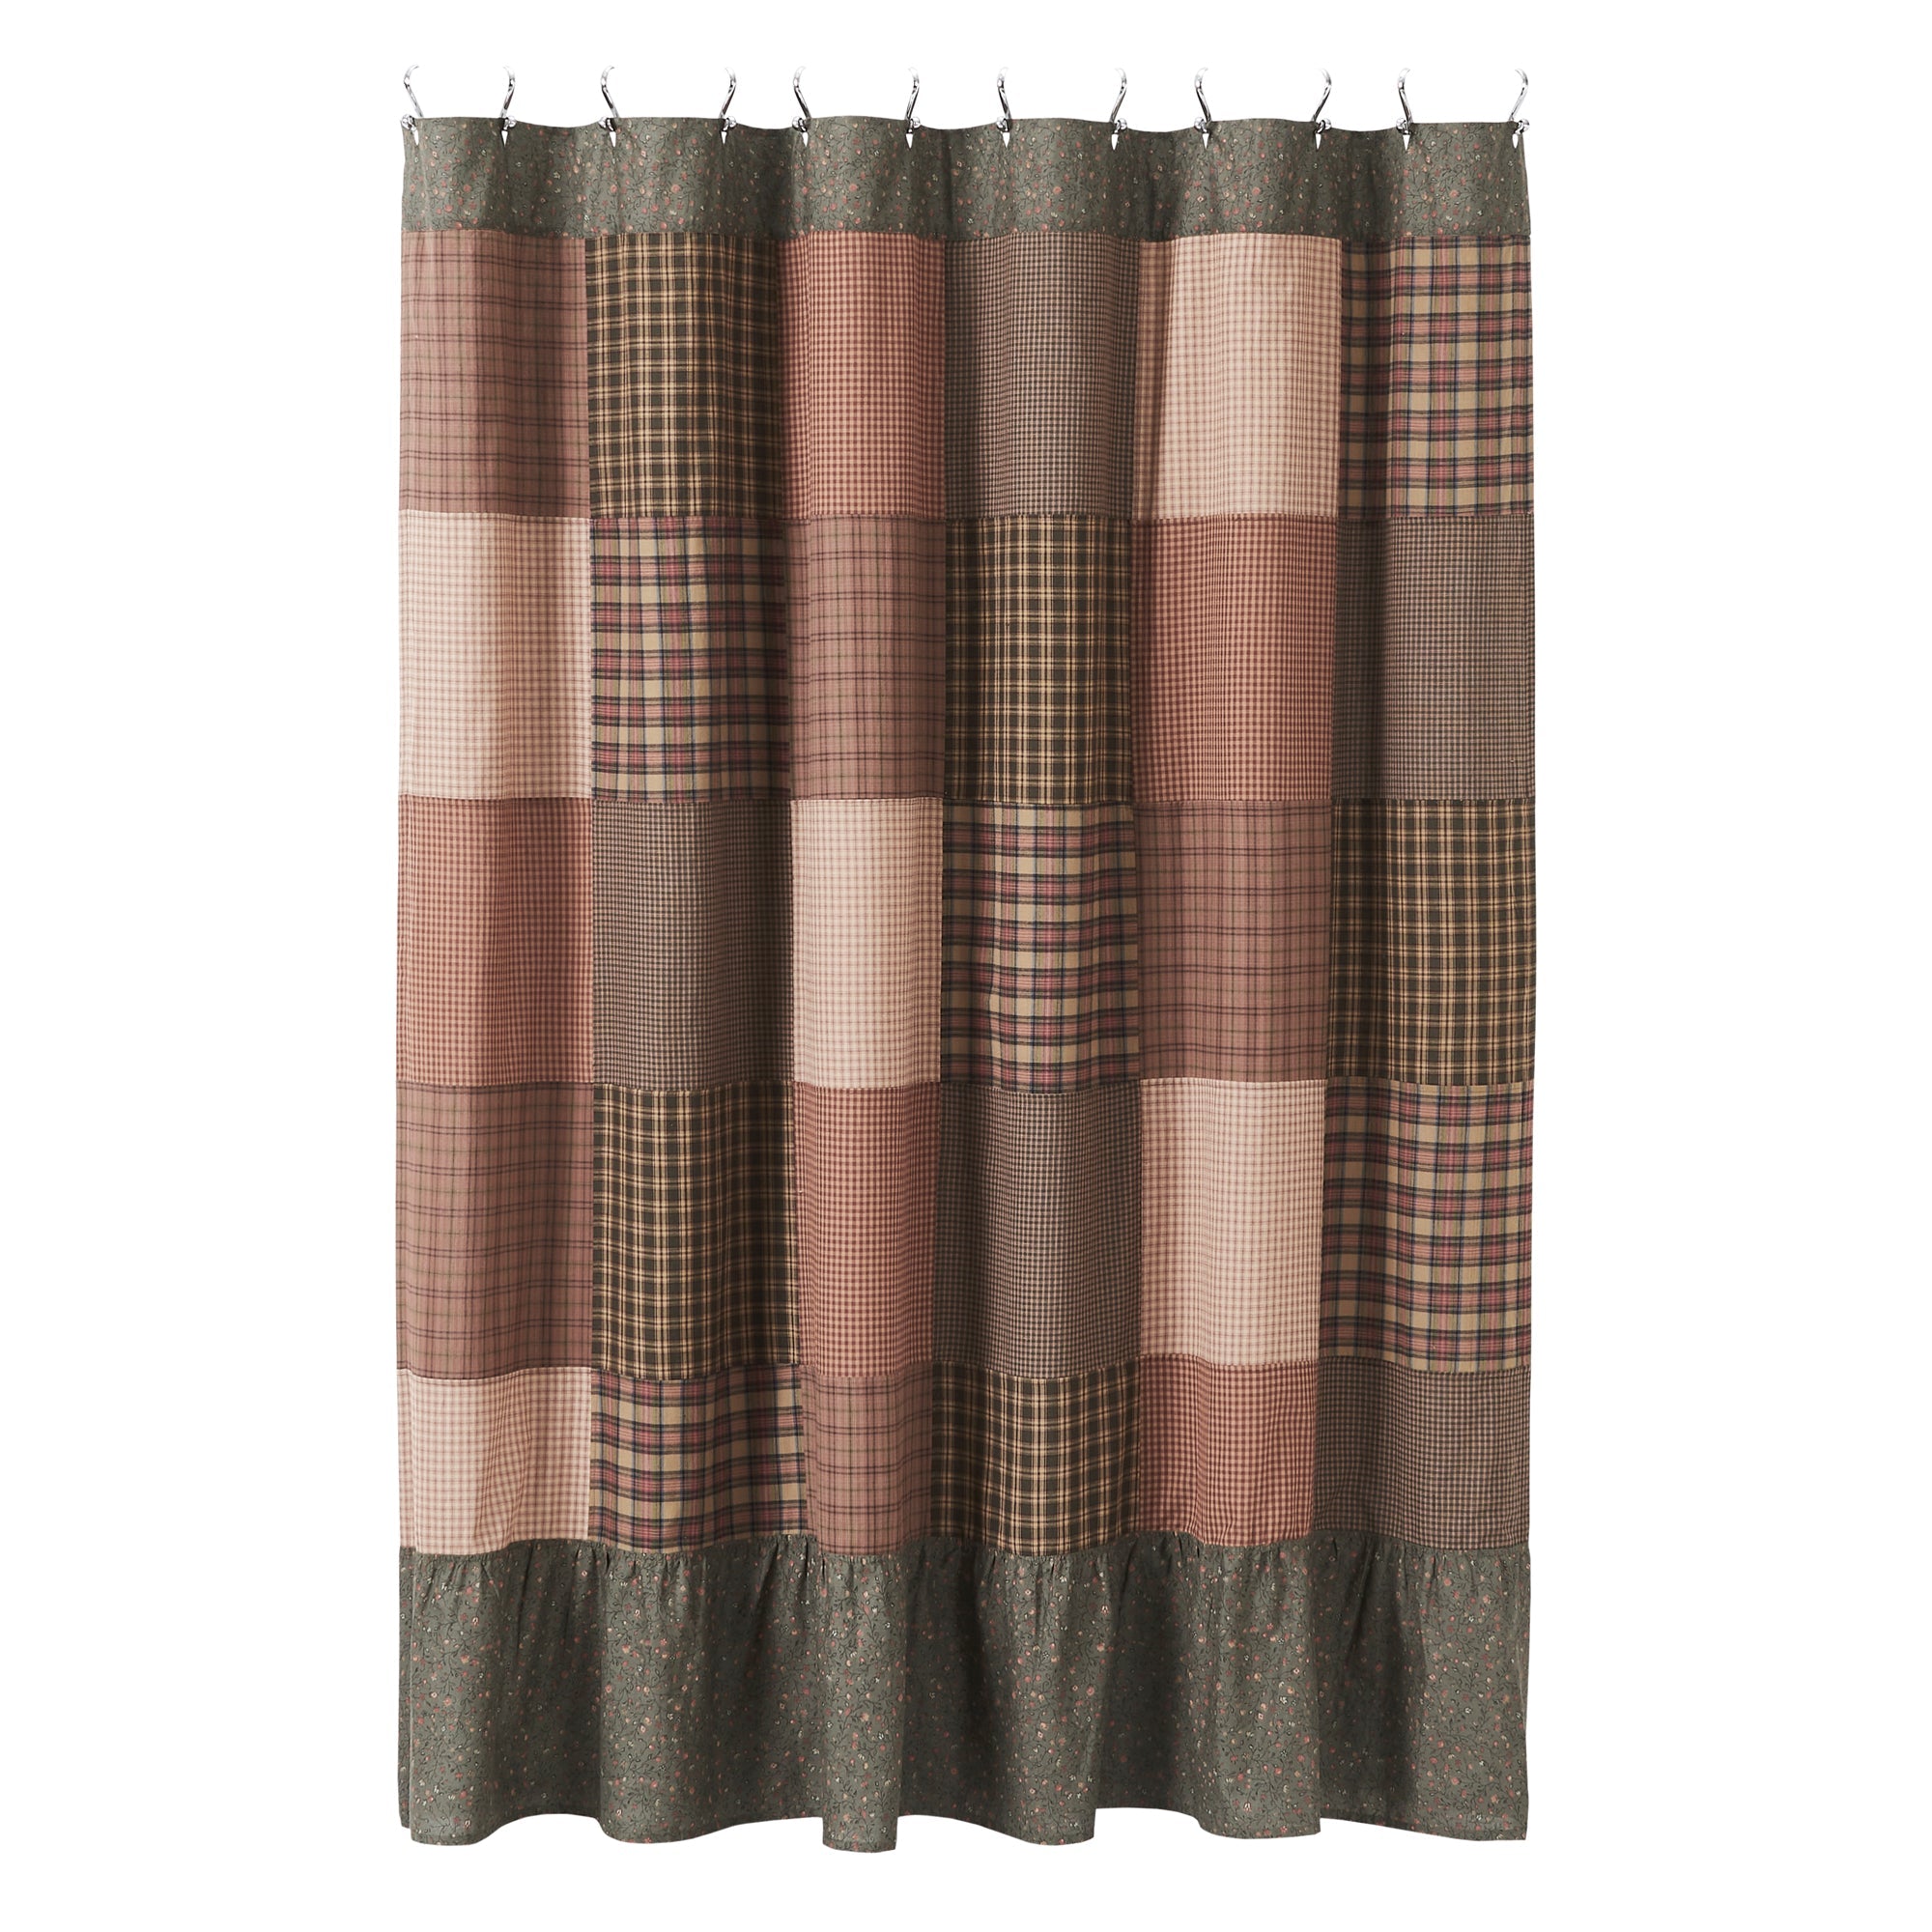 Crosswoods Patchwork Shower Curtain 72x72 VHC Brands